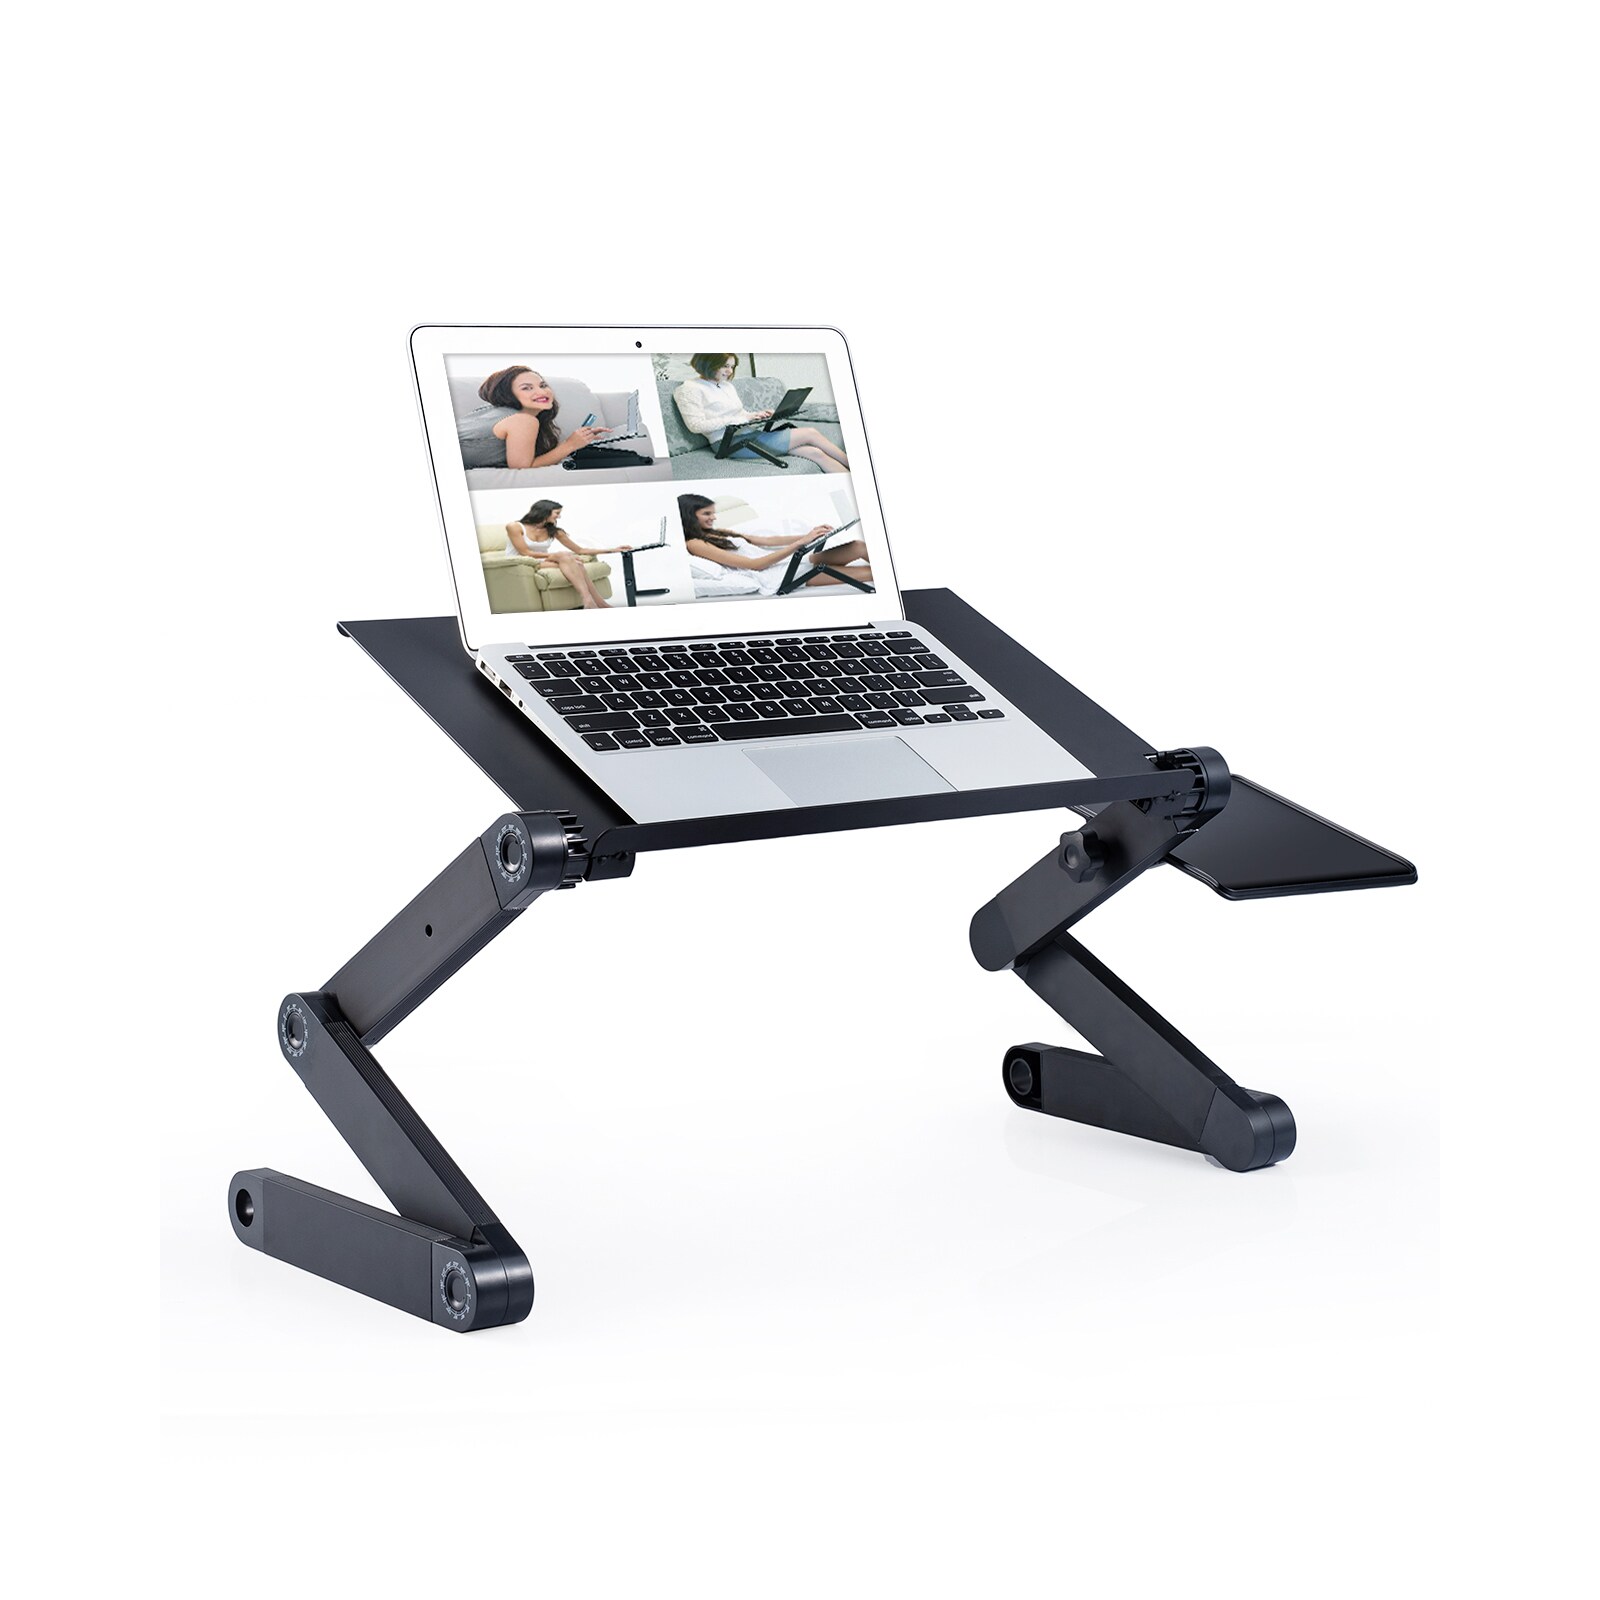 Rainbean RAINBEAN 16.5 in. Black Adjustable and Foldable Portable Laptop  Stand with Mouse Pad and 2 CPU Cooling USB Fans